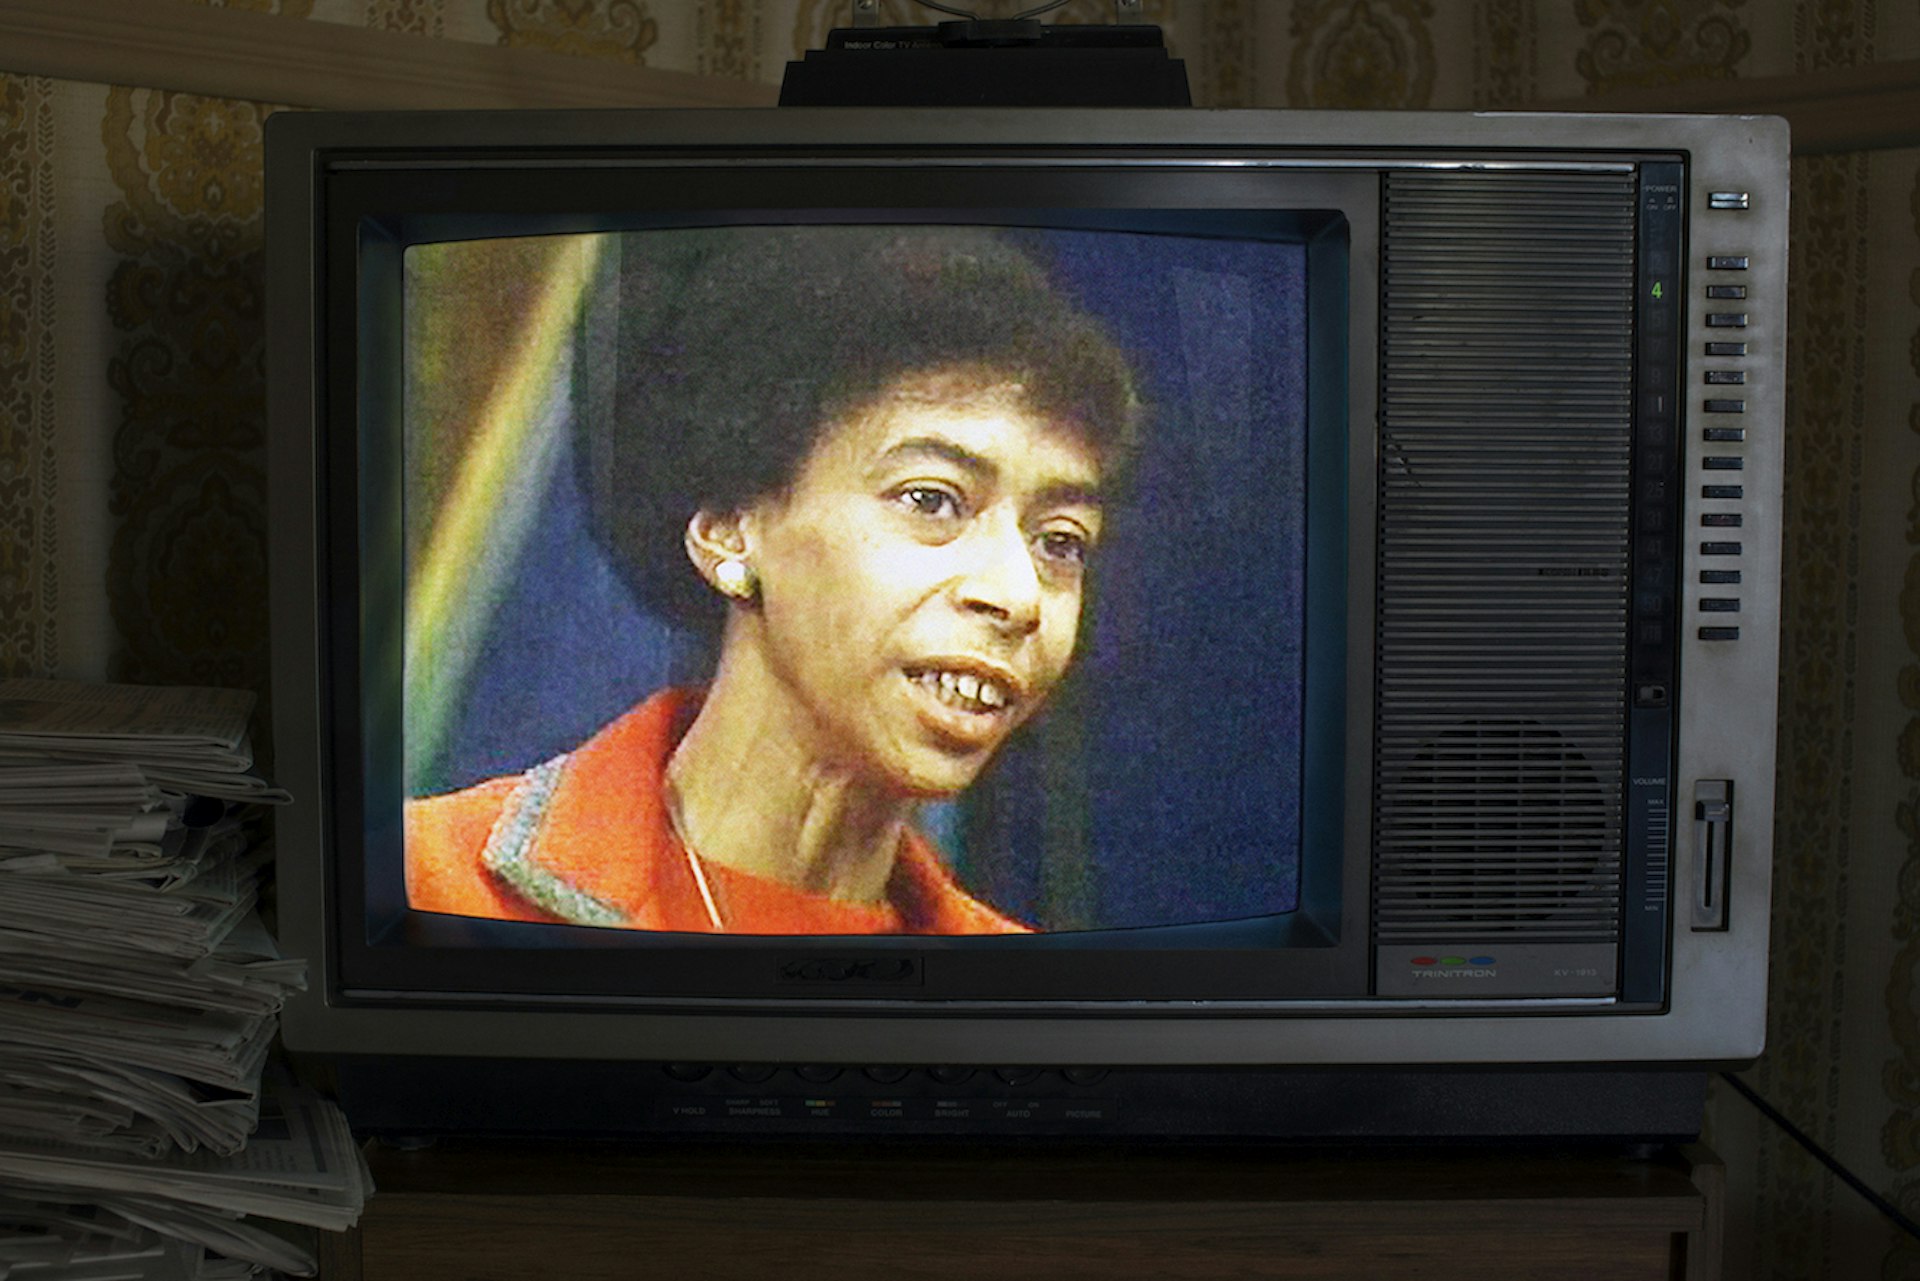 VCR visionary: The woman who taped 33 years of TV news